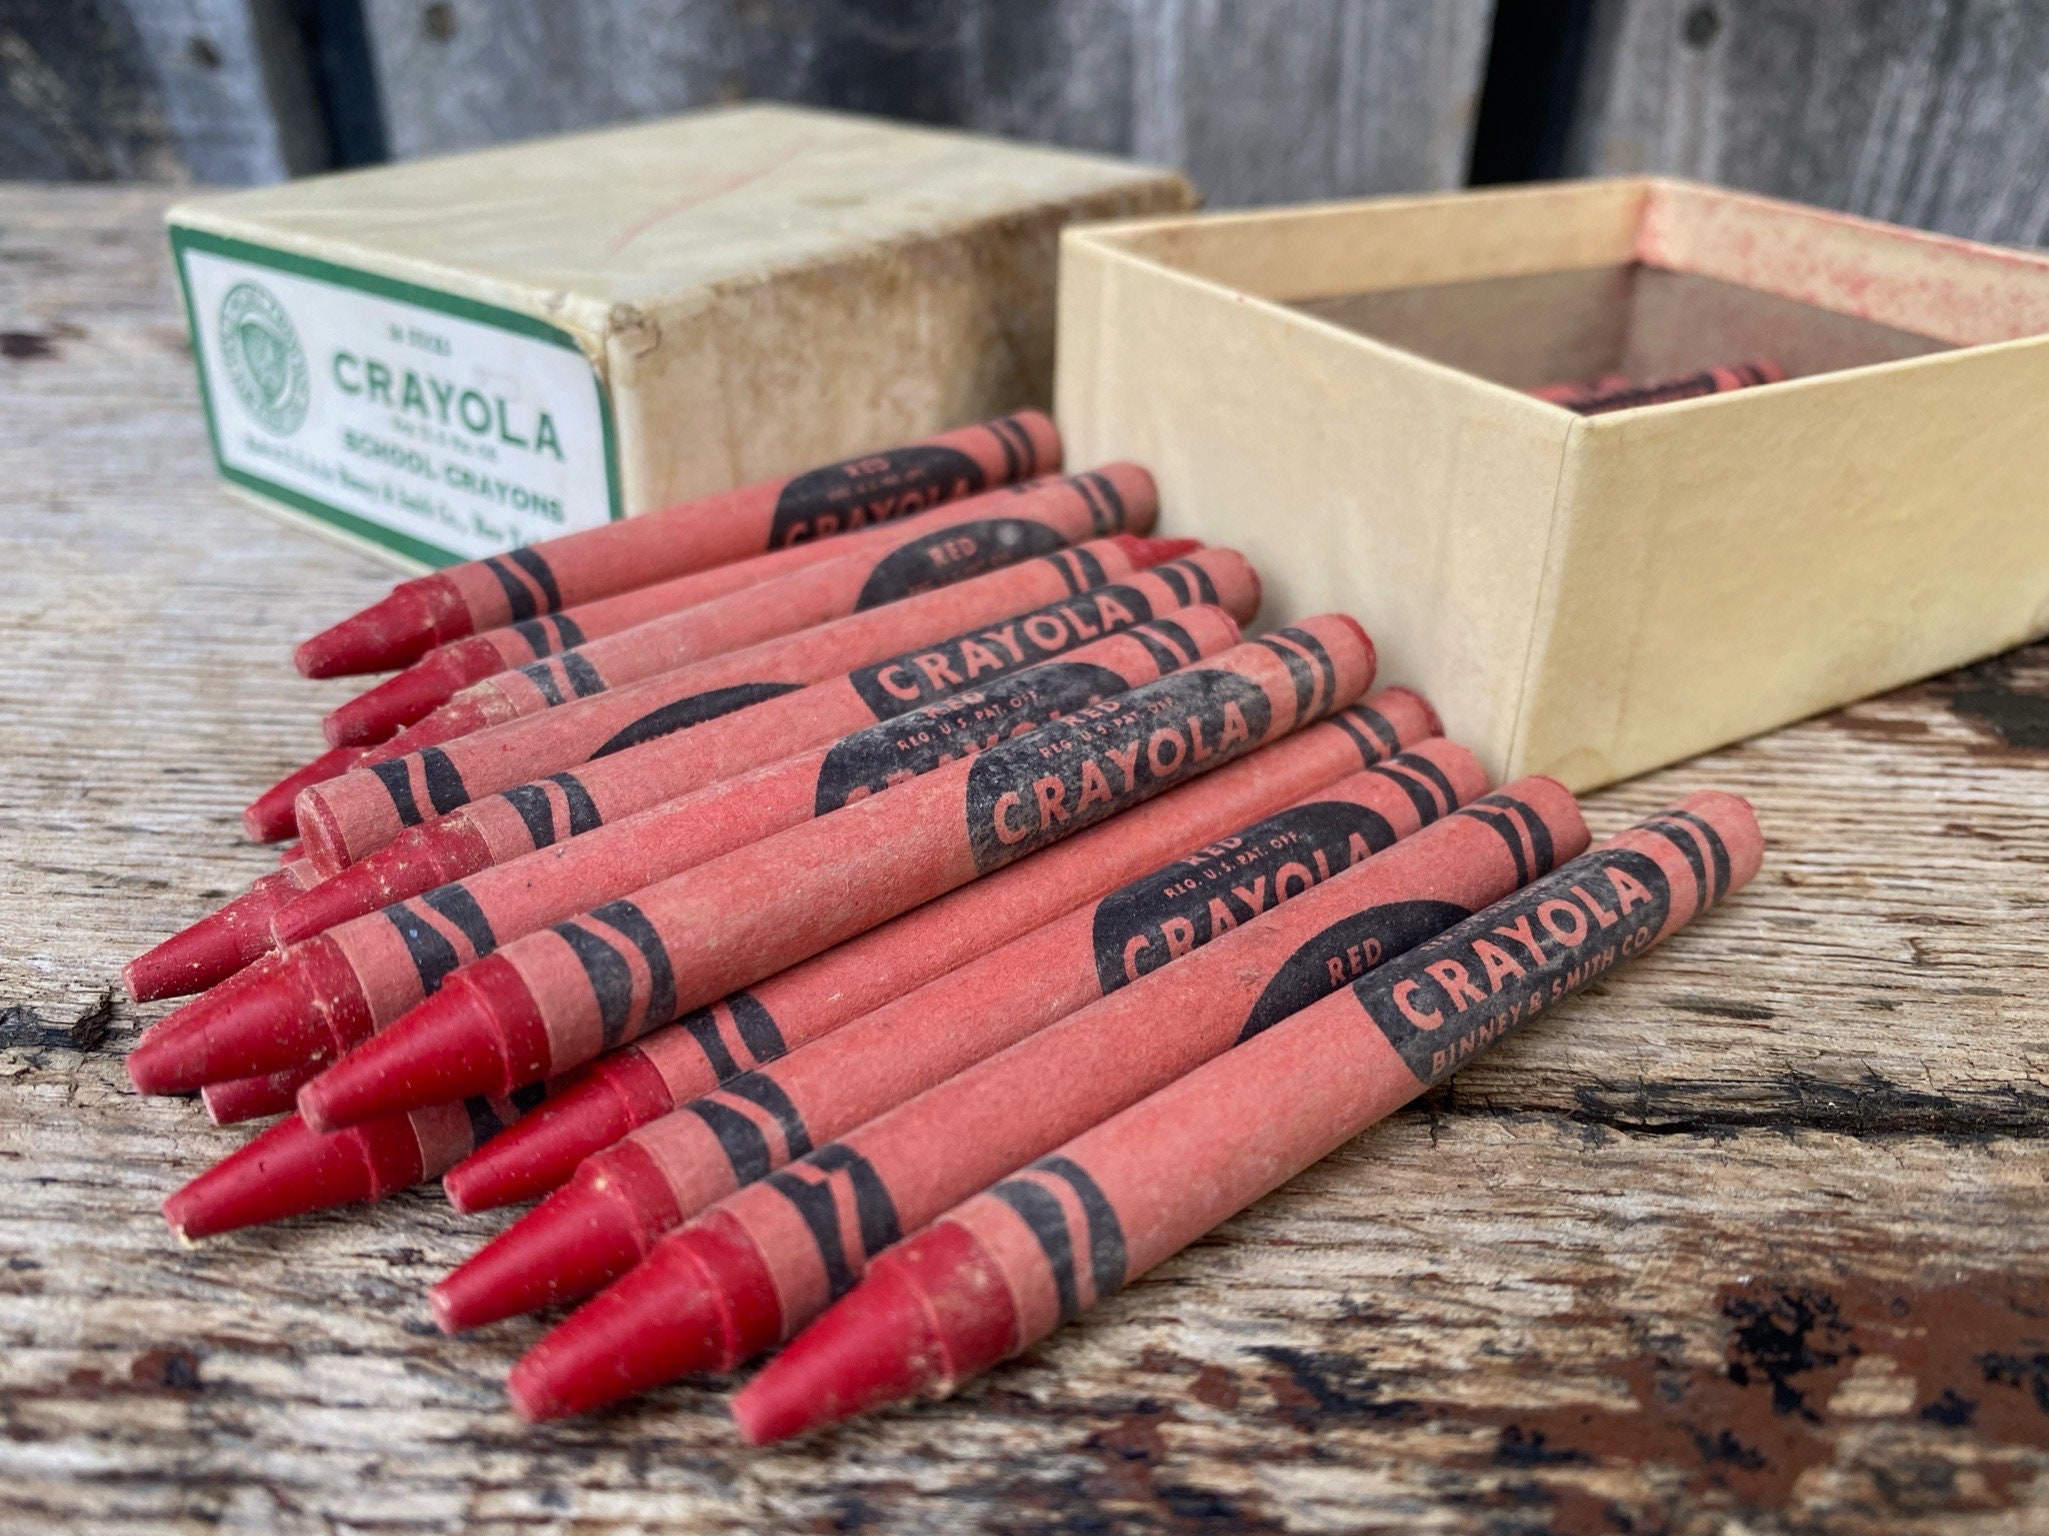 Vintage Amaco Colored Chalk Blackboard Crayon Tins With Red and Black Chalk  Vintage School Art Class Decor Two Available 